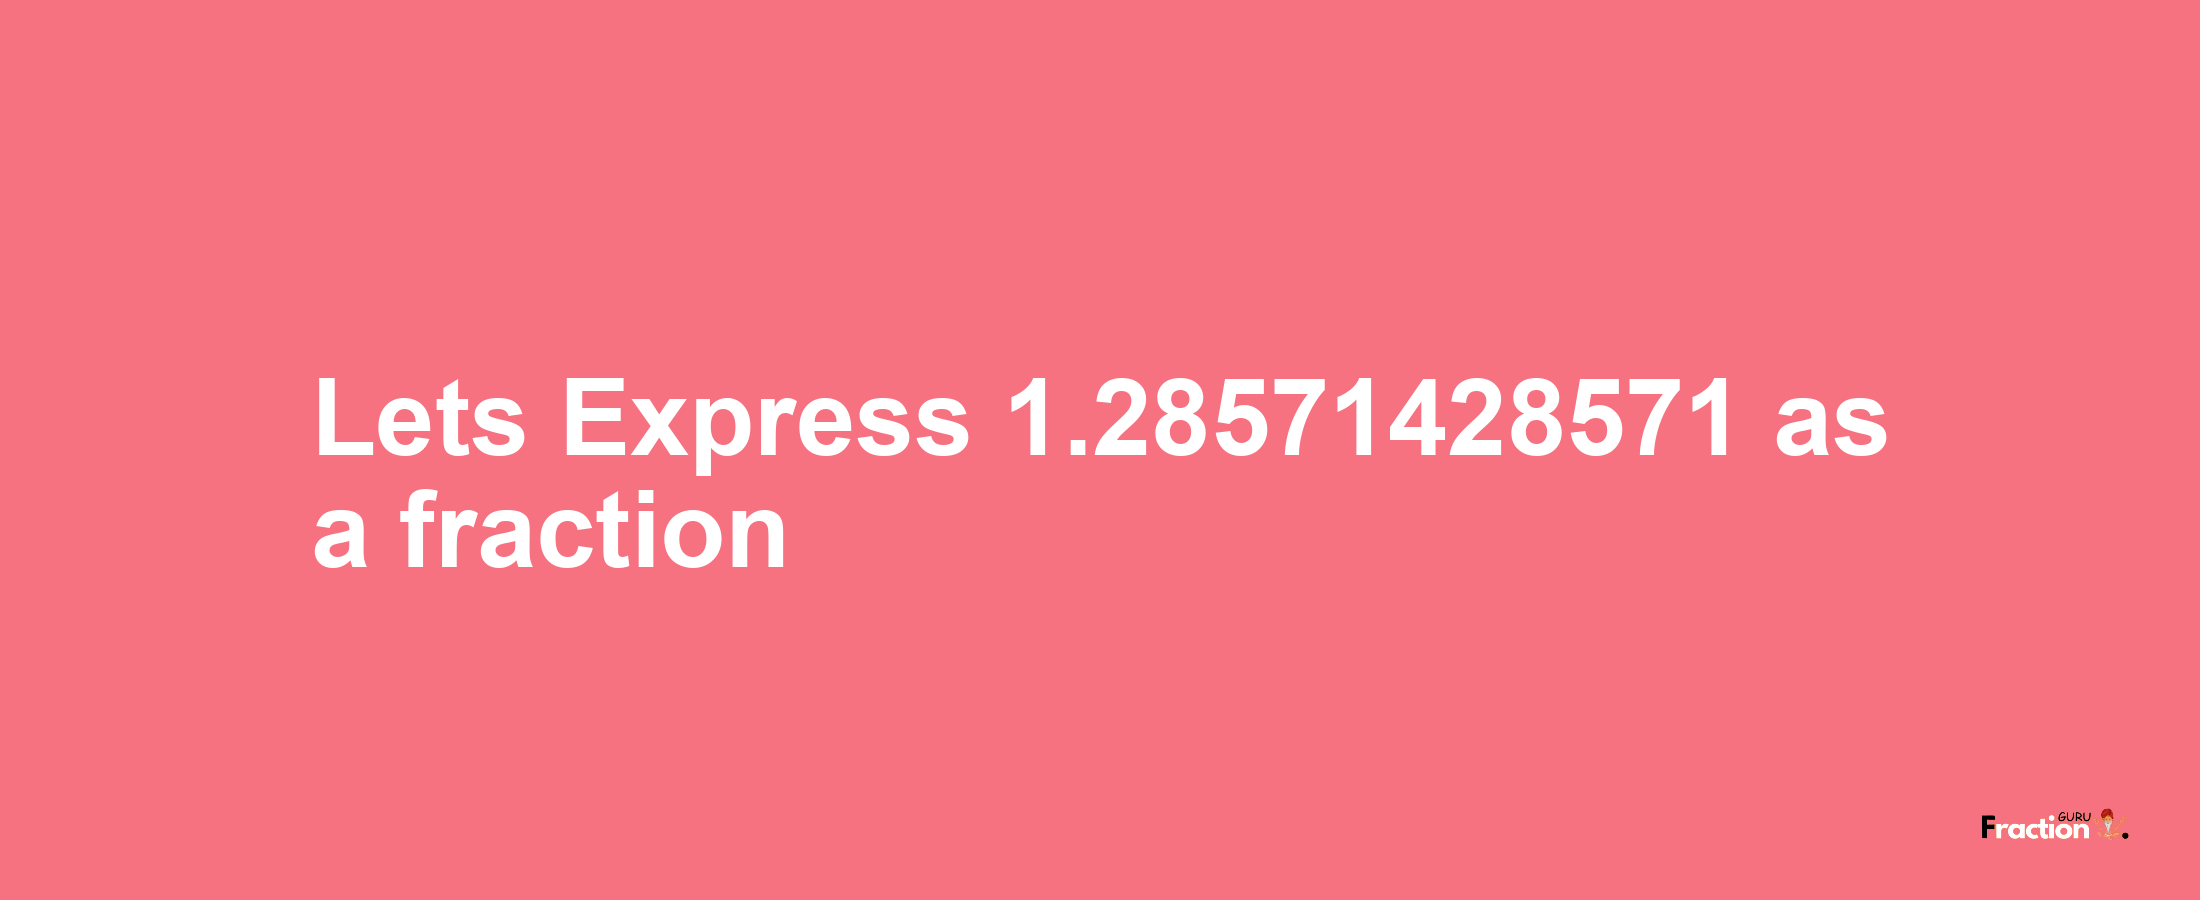 Lets Express 1.28571428571 as afraction